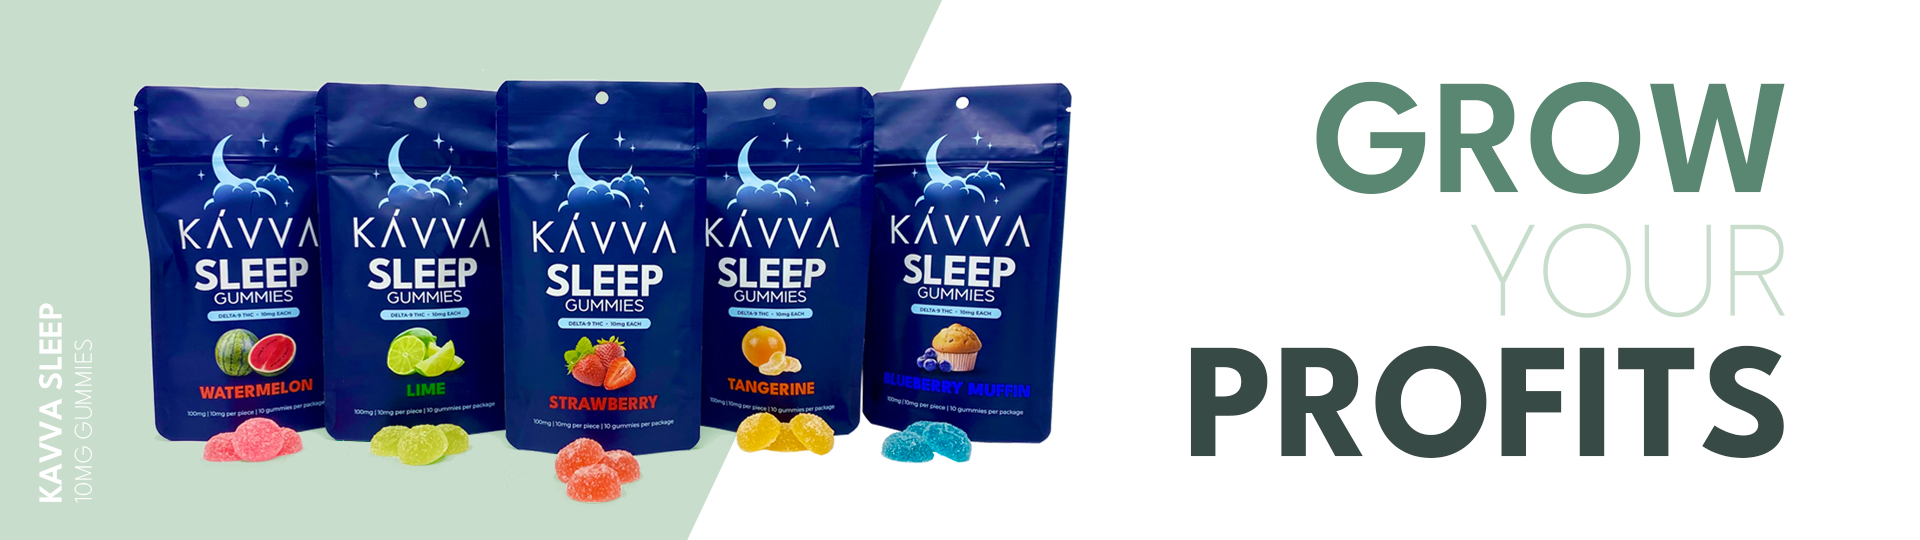 image of KAVVA Sleep gummy packages. Text reading Grow your profits